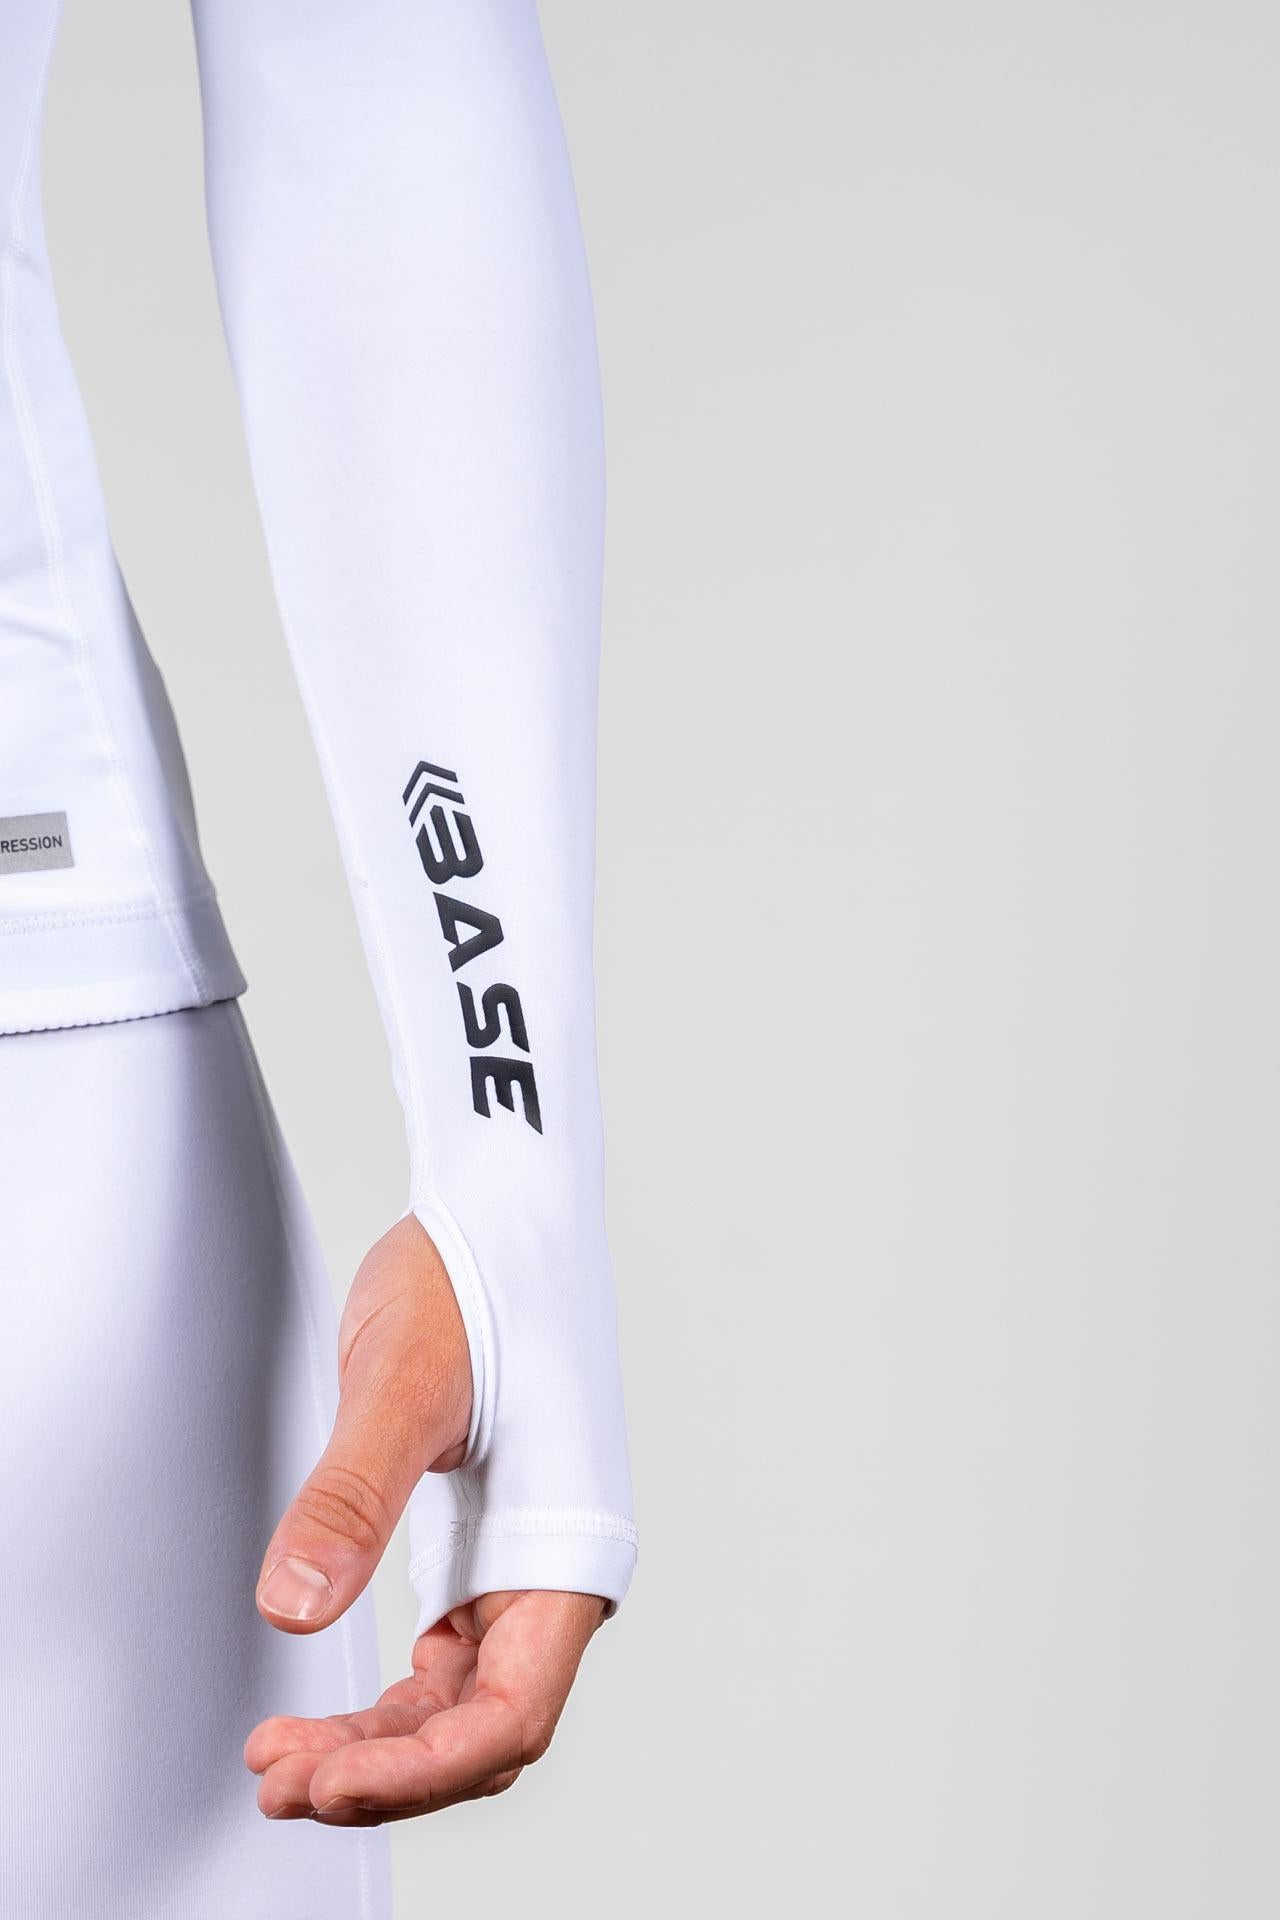 BASE Women's Long Sleeve Compression Tee - White - Adelaide 36ers